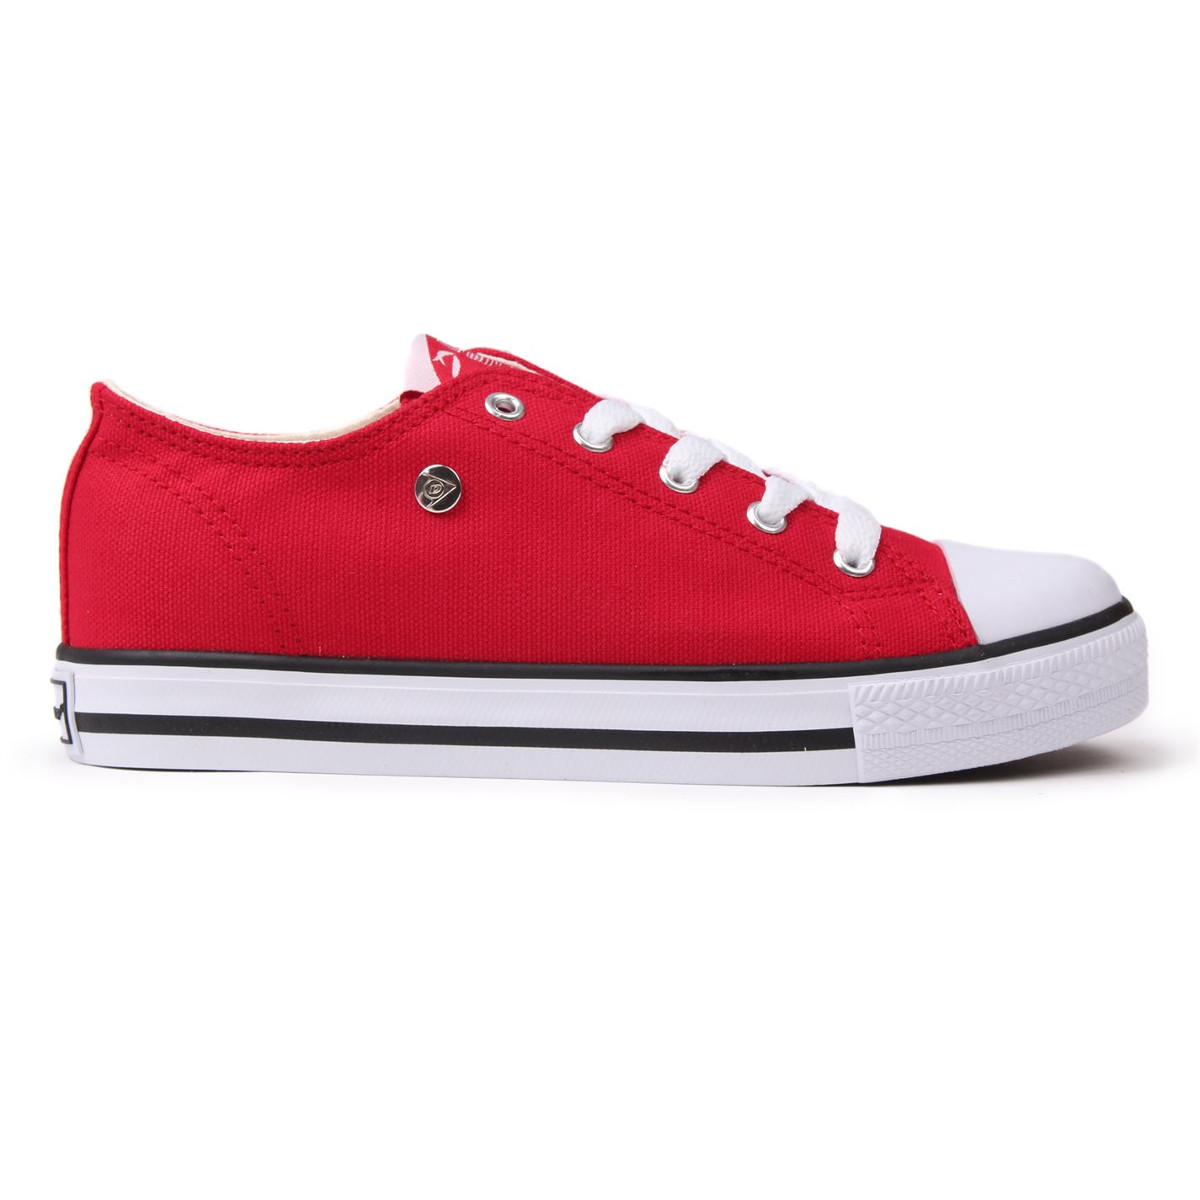 Dunlop Kids' Canvas Low Sneakers - Red, 12